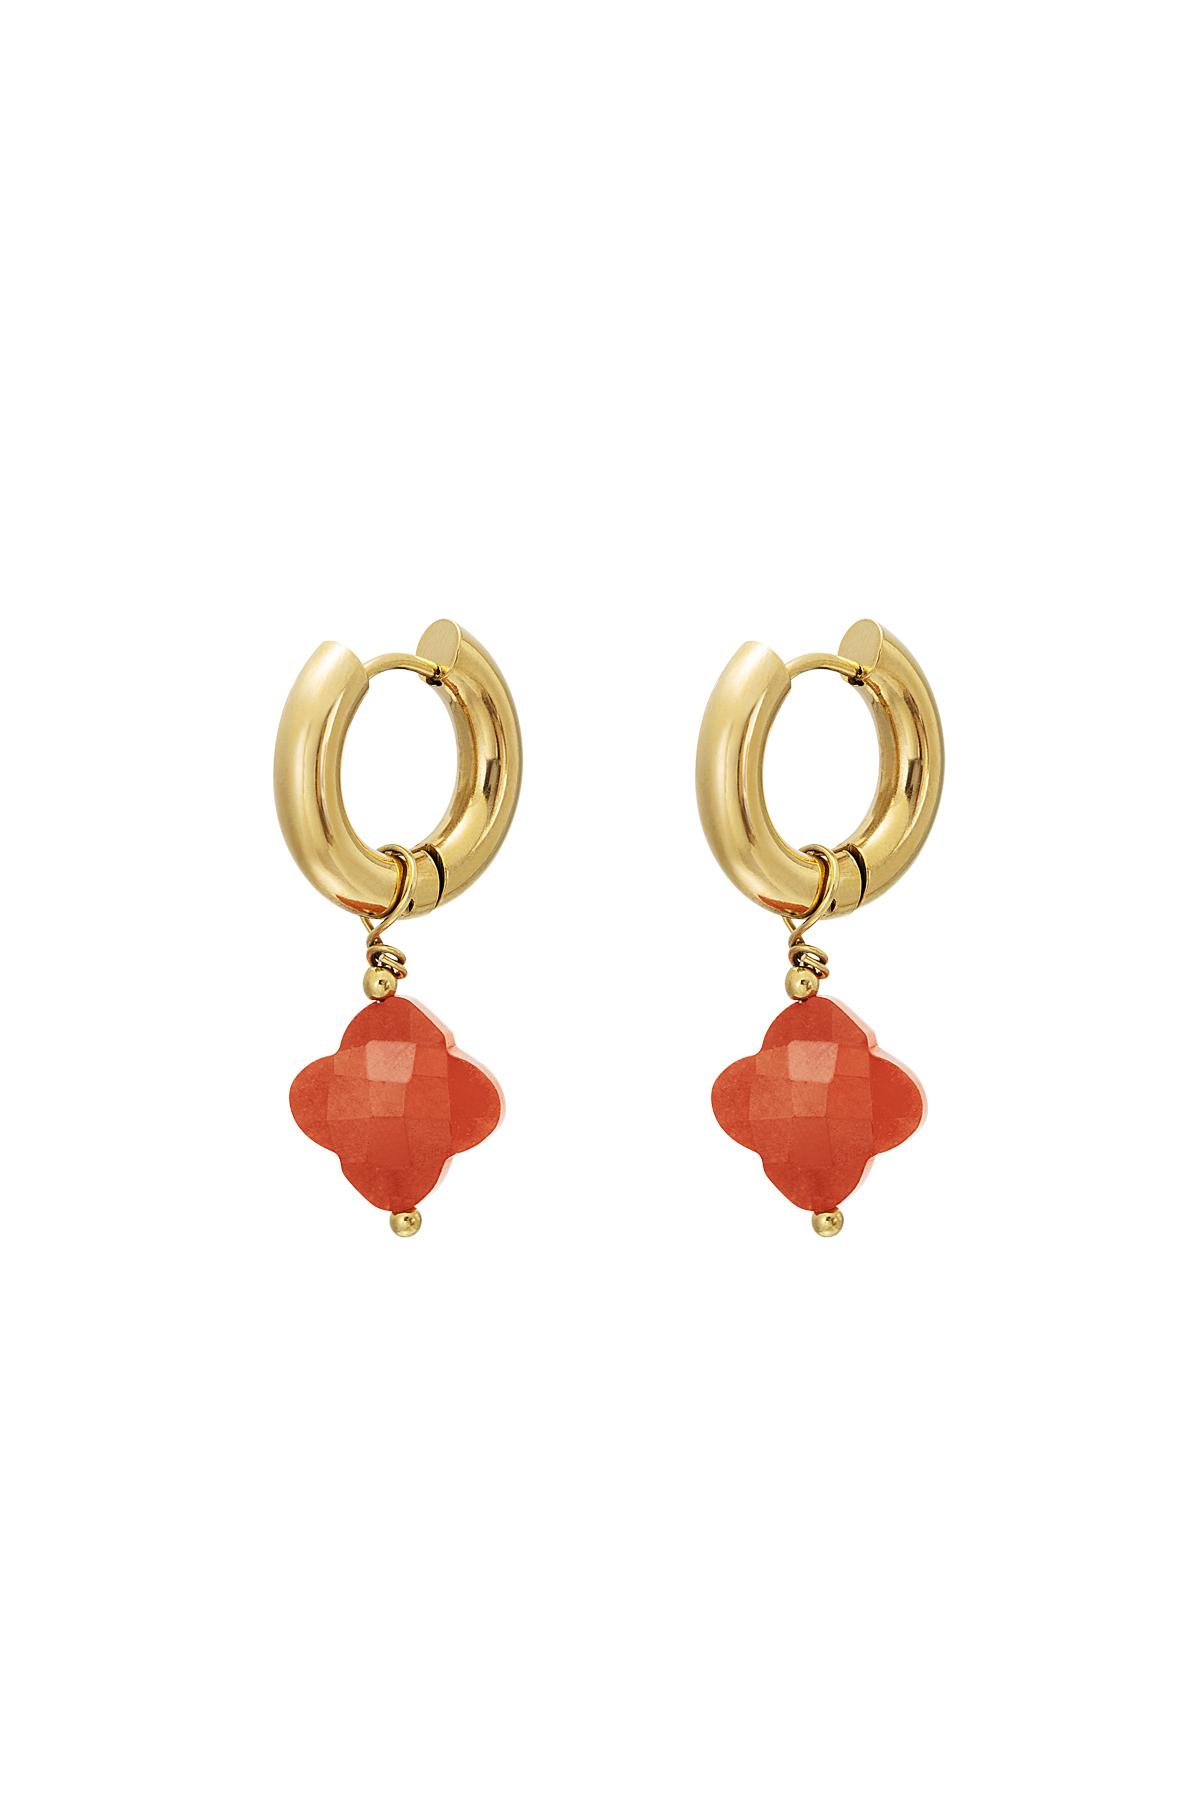 Clover earrings - #summergirls collection Orange &amp; Gold Stainless Steel